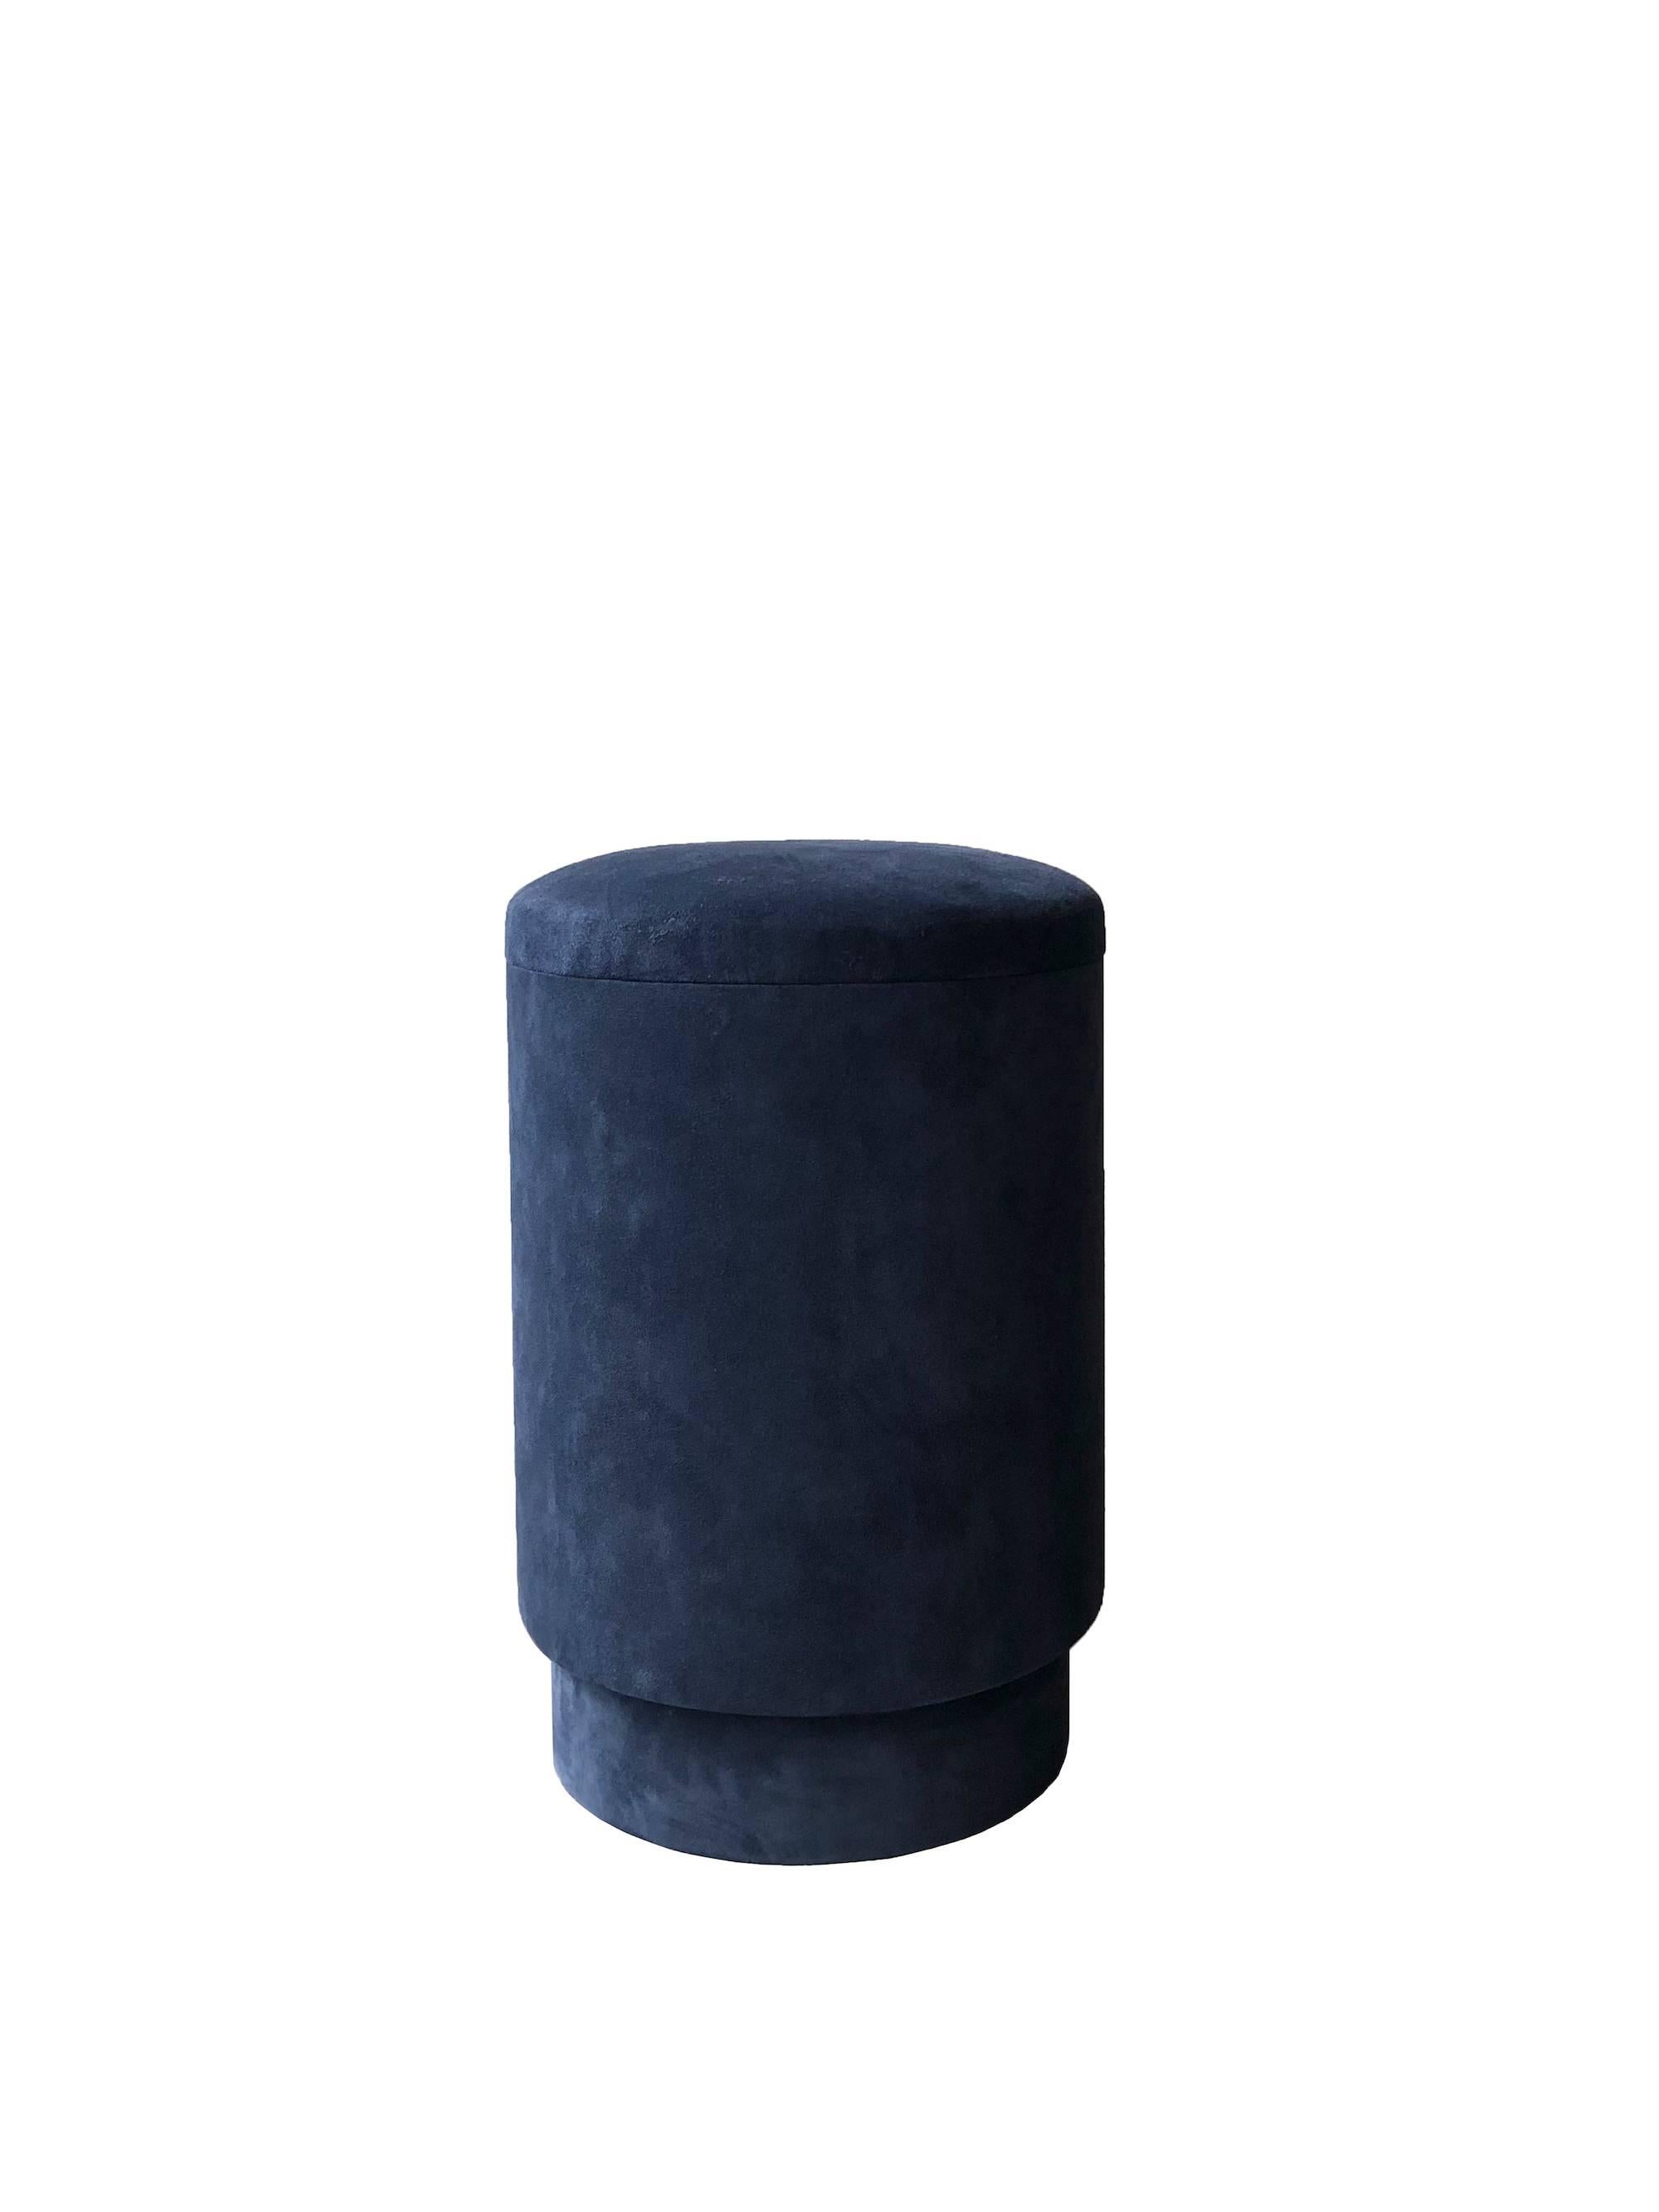 Stool on foot, covered with suede with storage space. Available in blue and grey.
